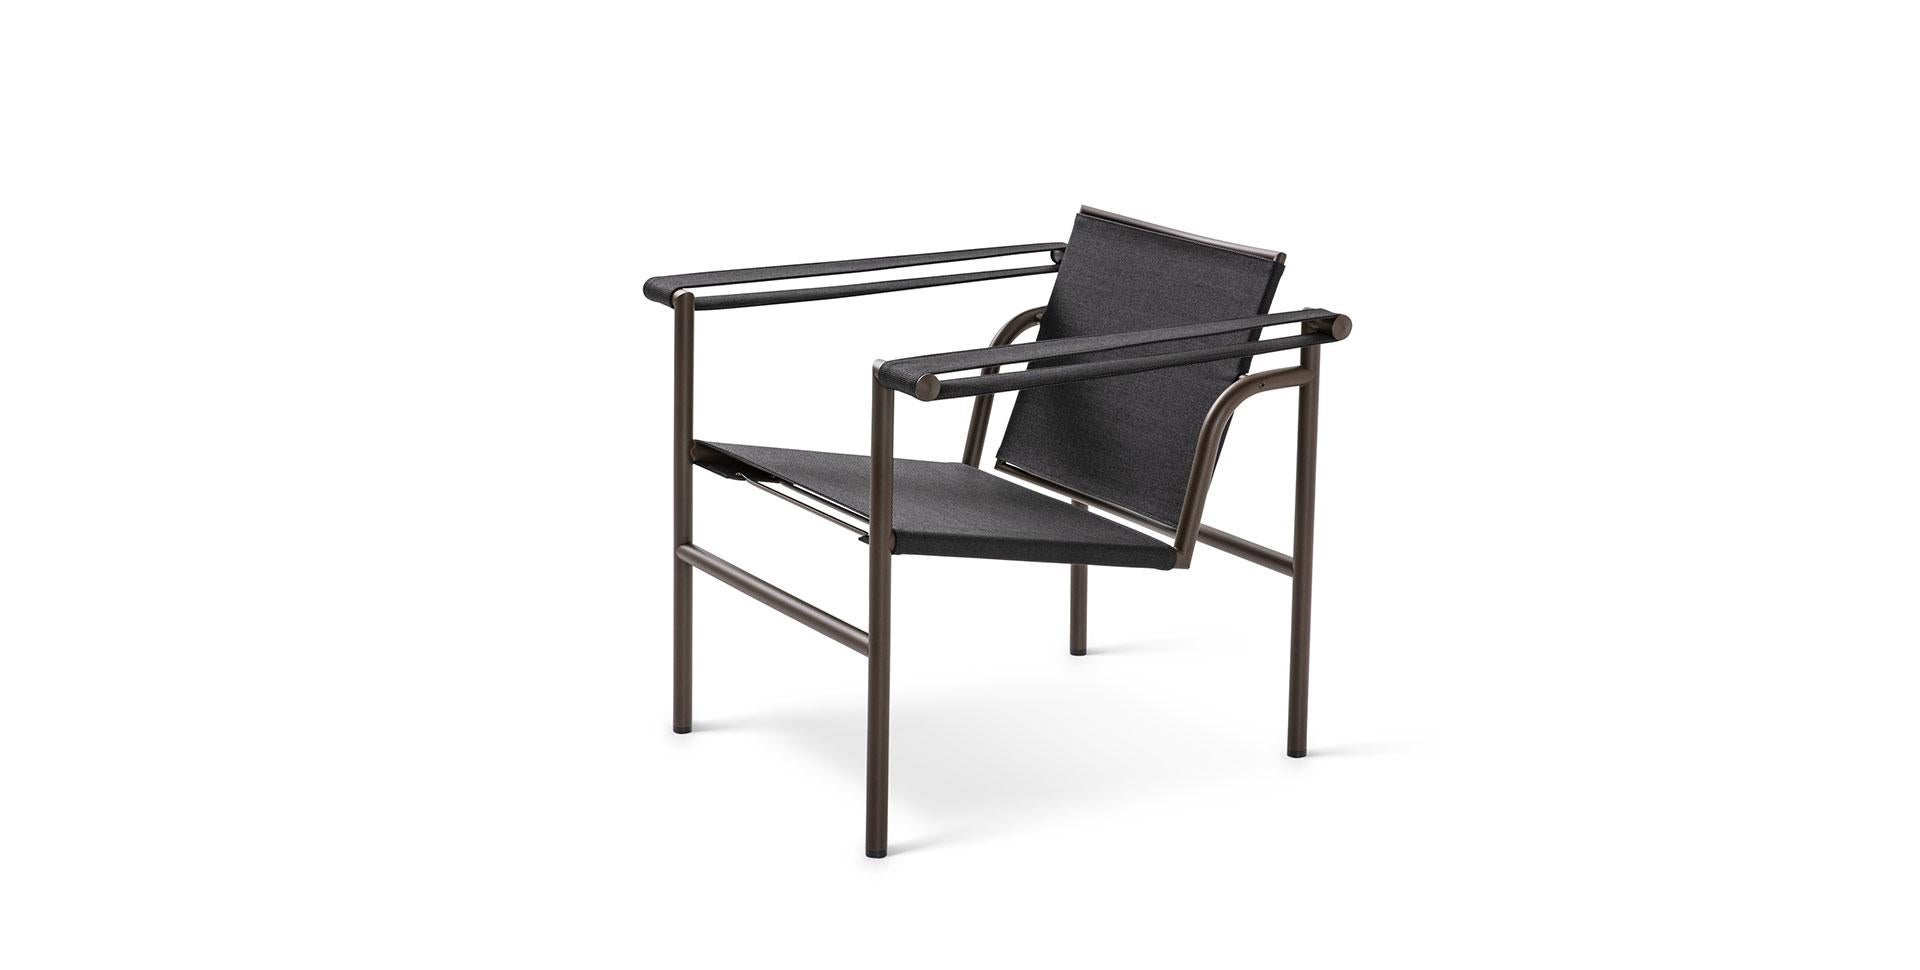 Chair designed by Le Corbusier, Pierre Jeanneret, Charlotte Perriand in 1928. Relaunched in 2019.
Manufactured by Cassina in Italy.

A light, compact chair designed and presented at the 1929 Salon d’Automne along with other important models, such